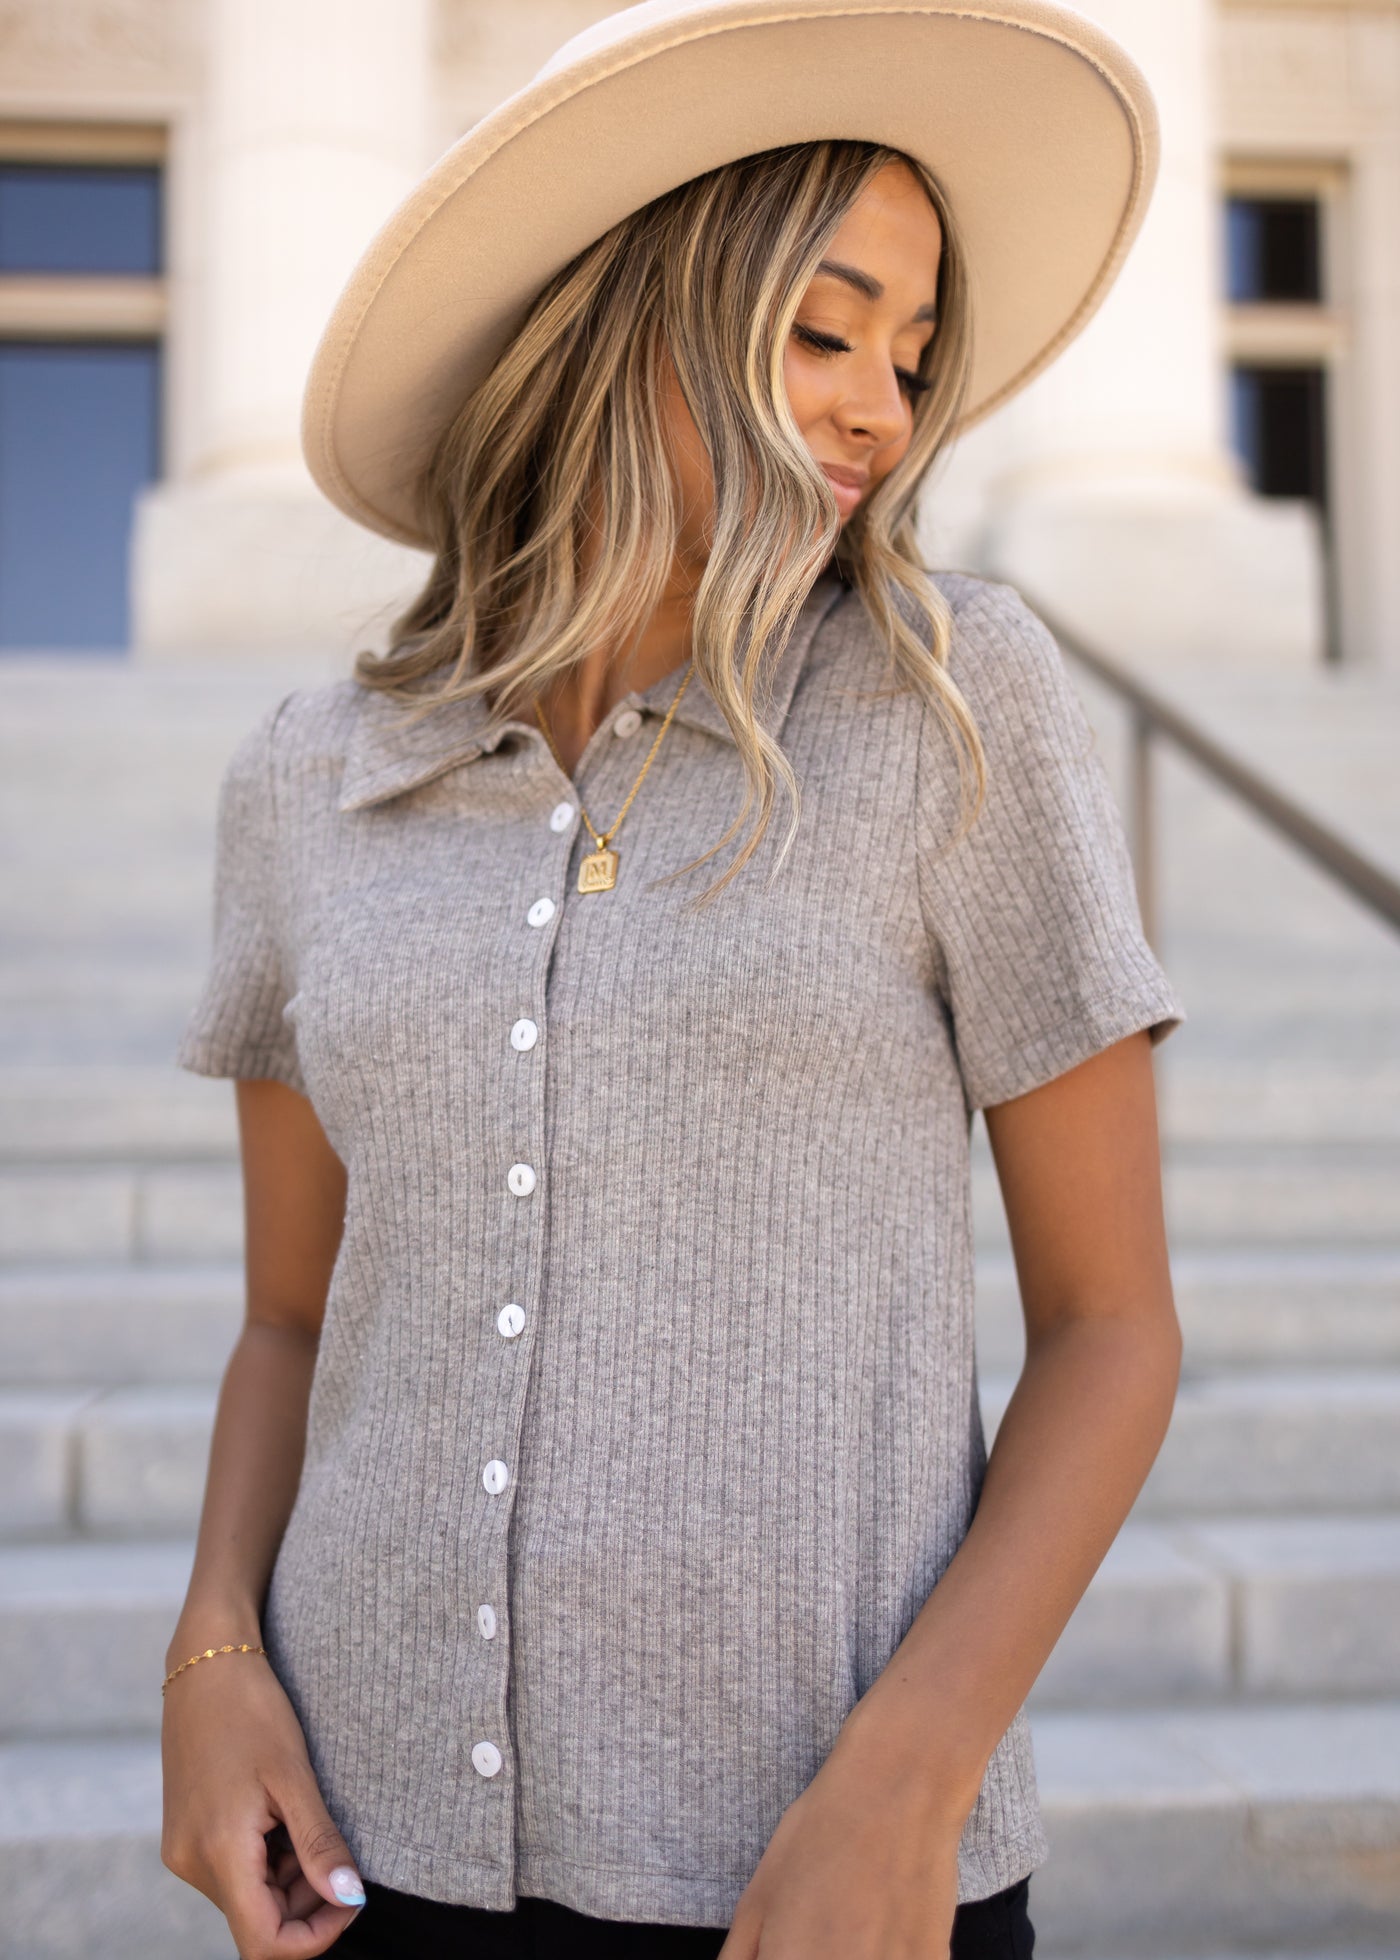 Short sleeve button up heather gray top